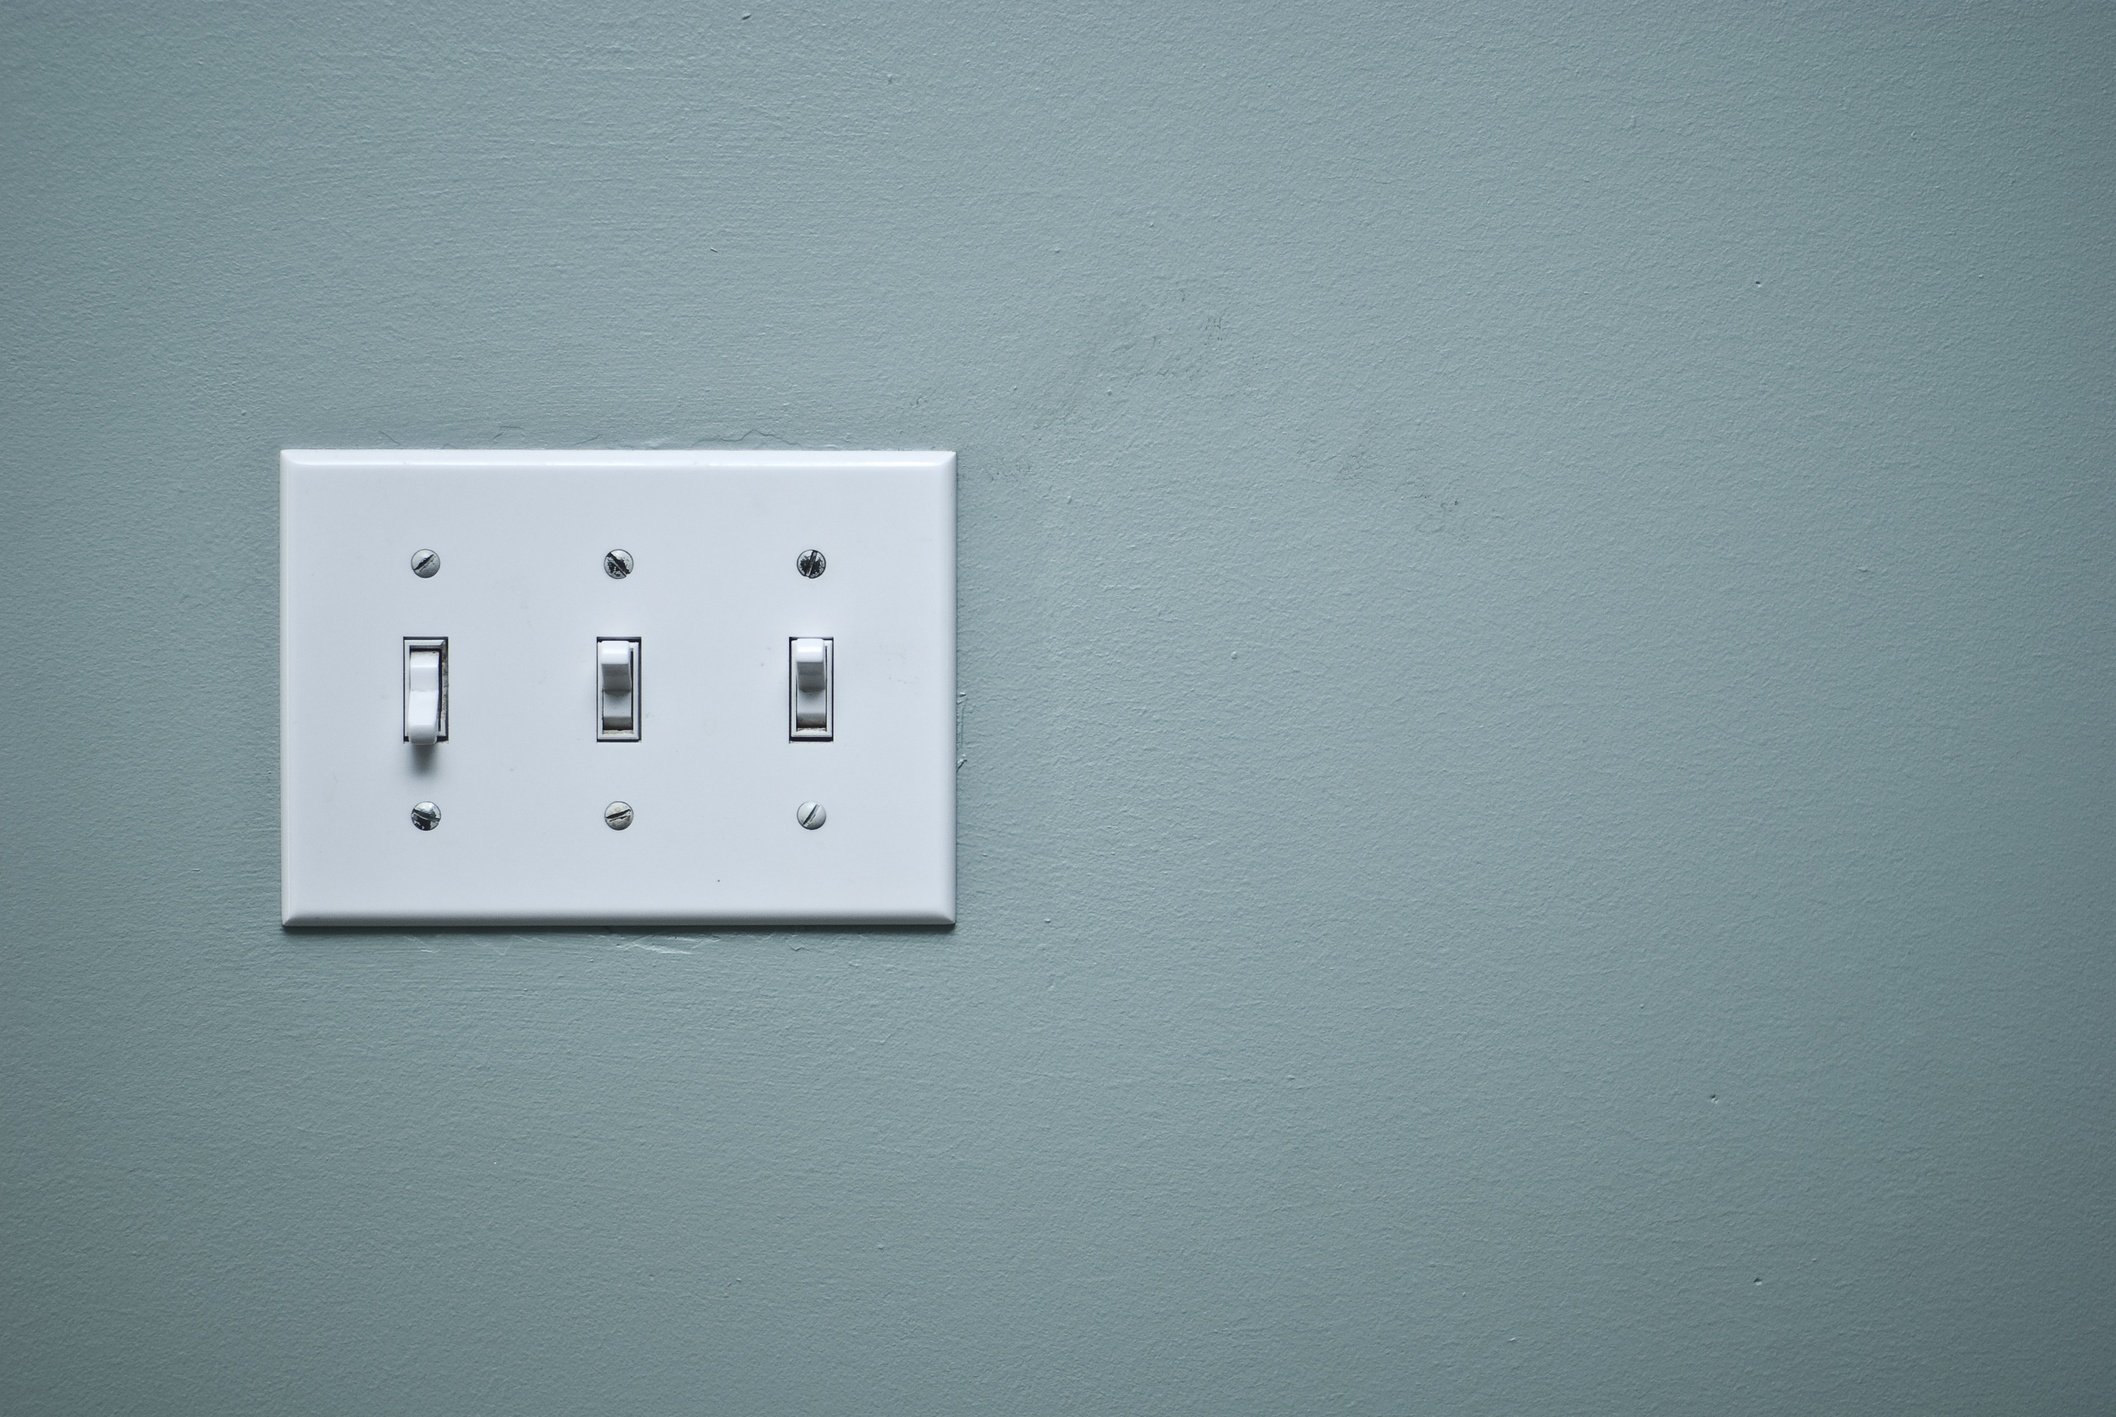 Light switch on a gray wall